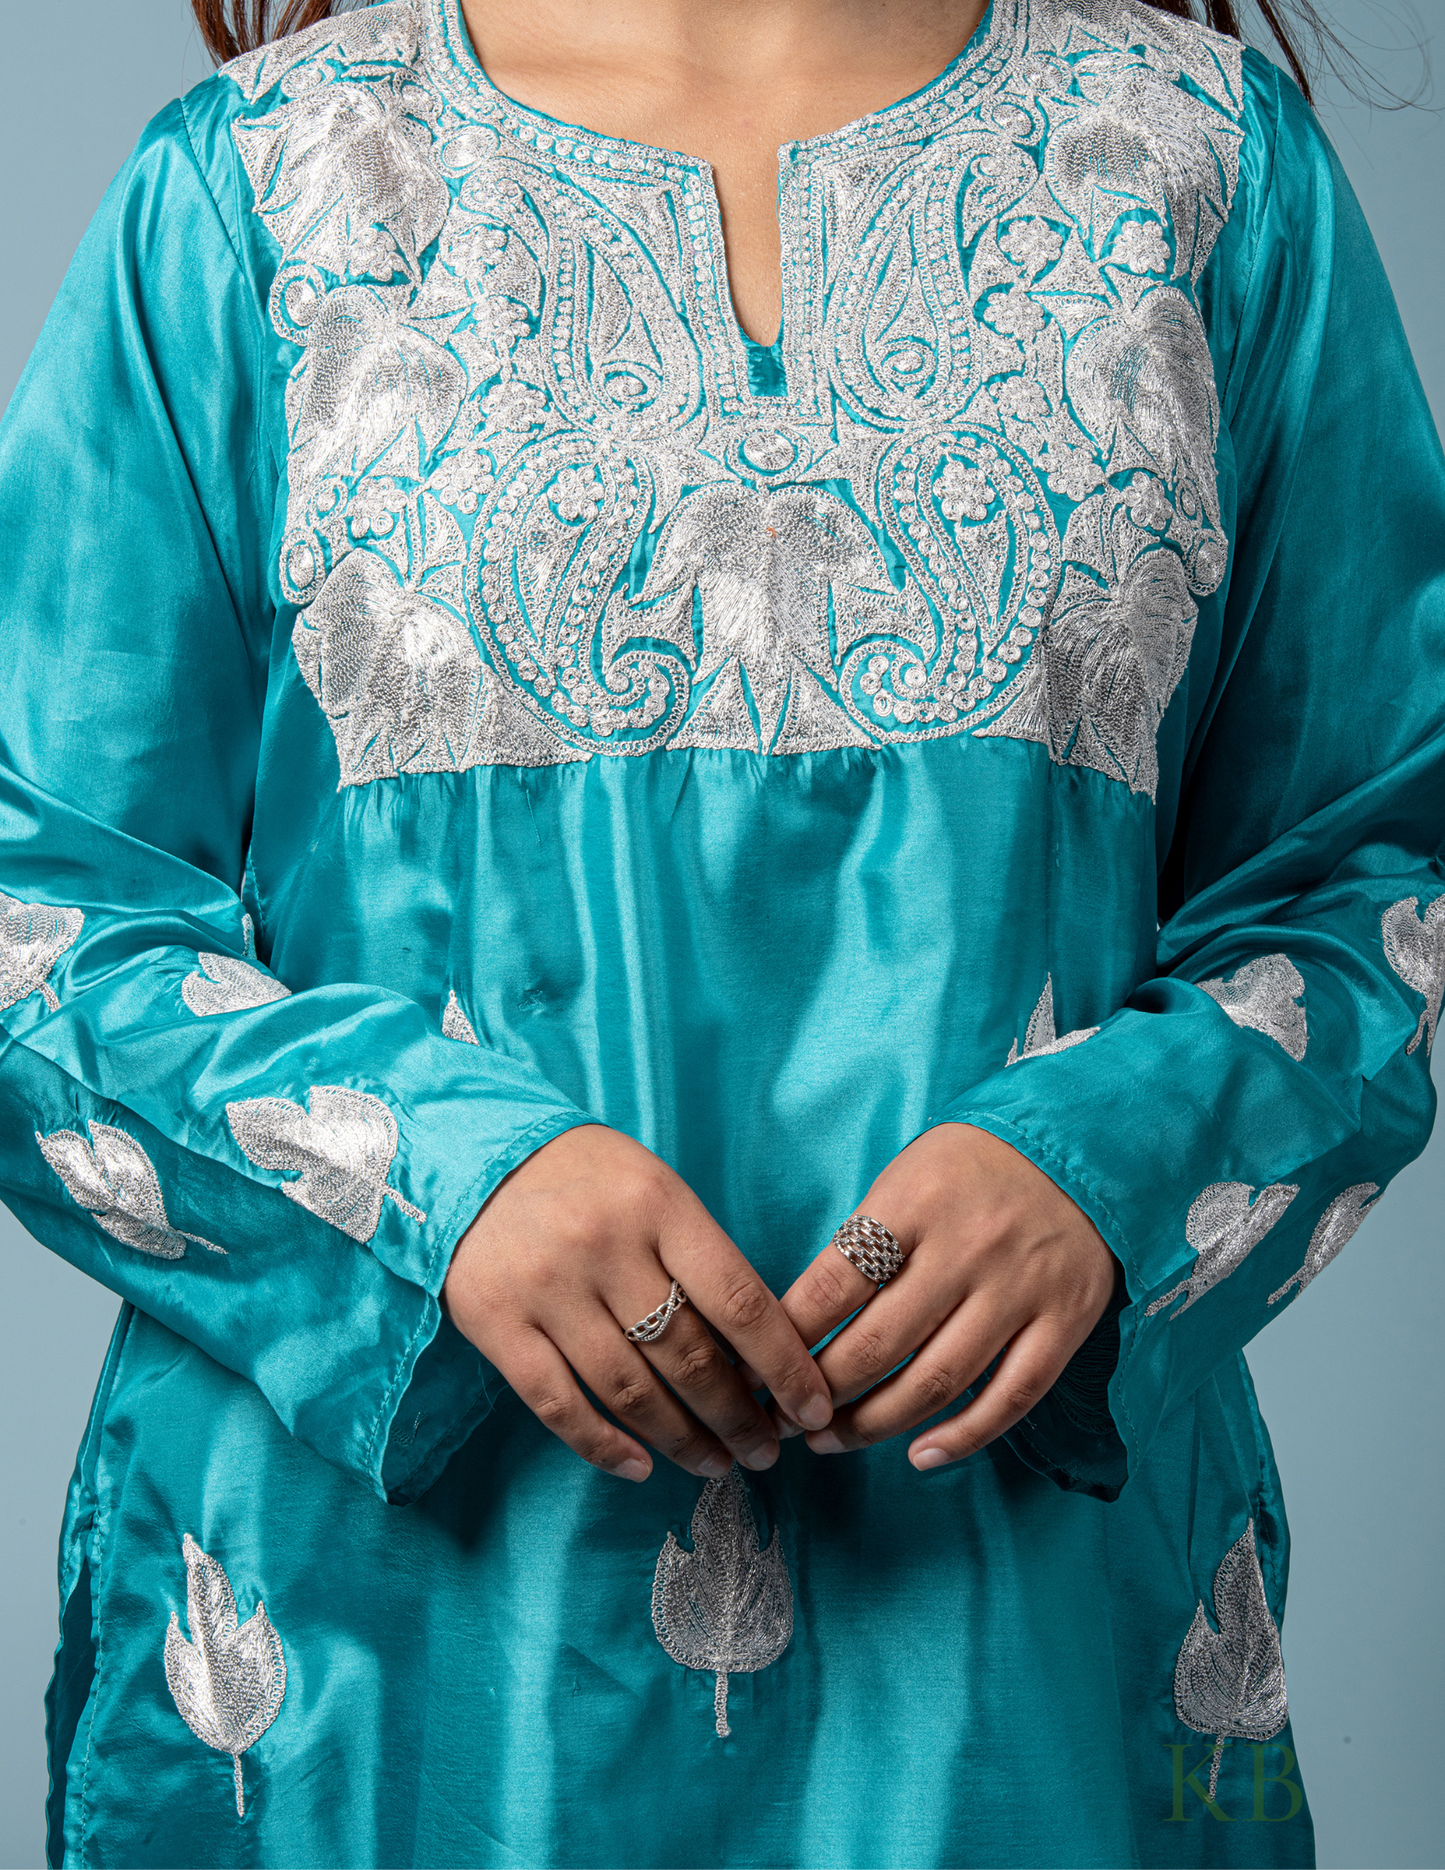 Inara Tilla Embroidered Sky Blue Silk Suit with 2.5 Meters Dupatta - Kashmir Box